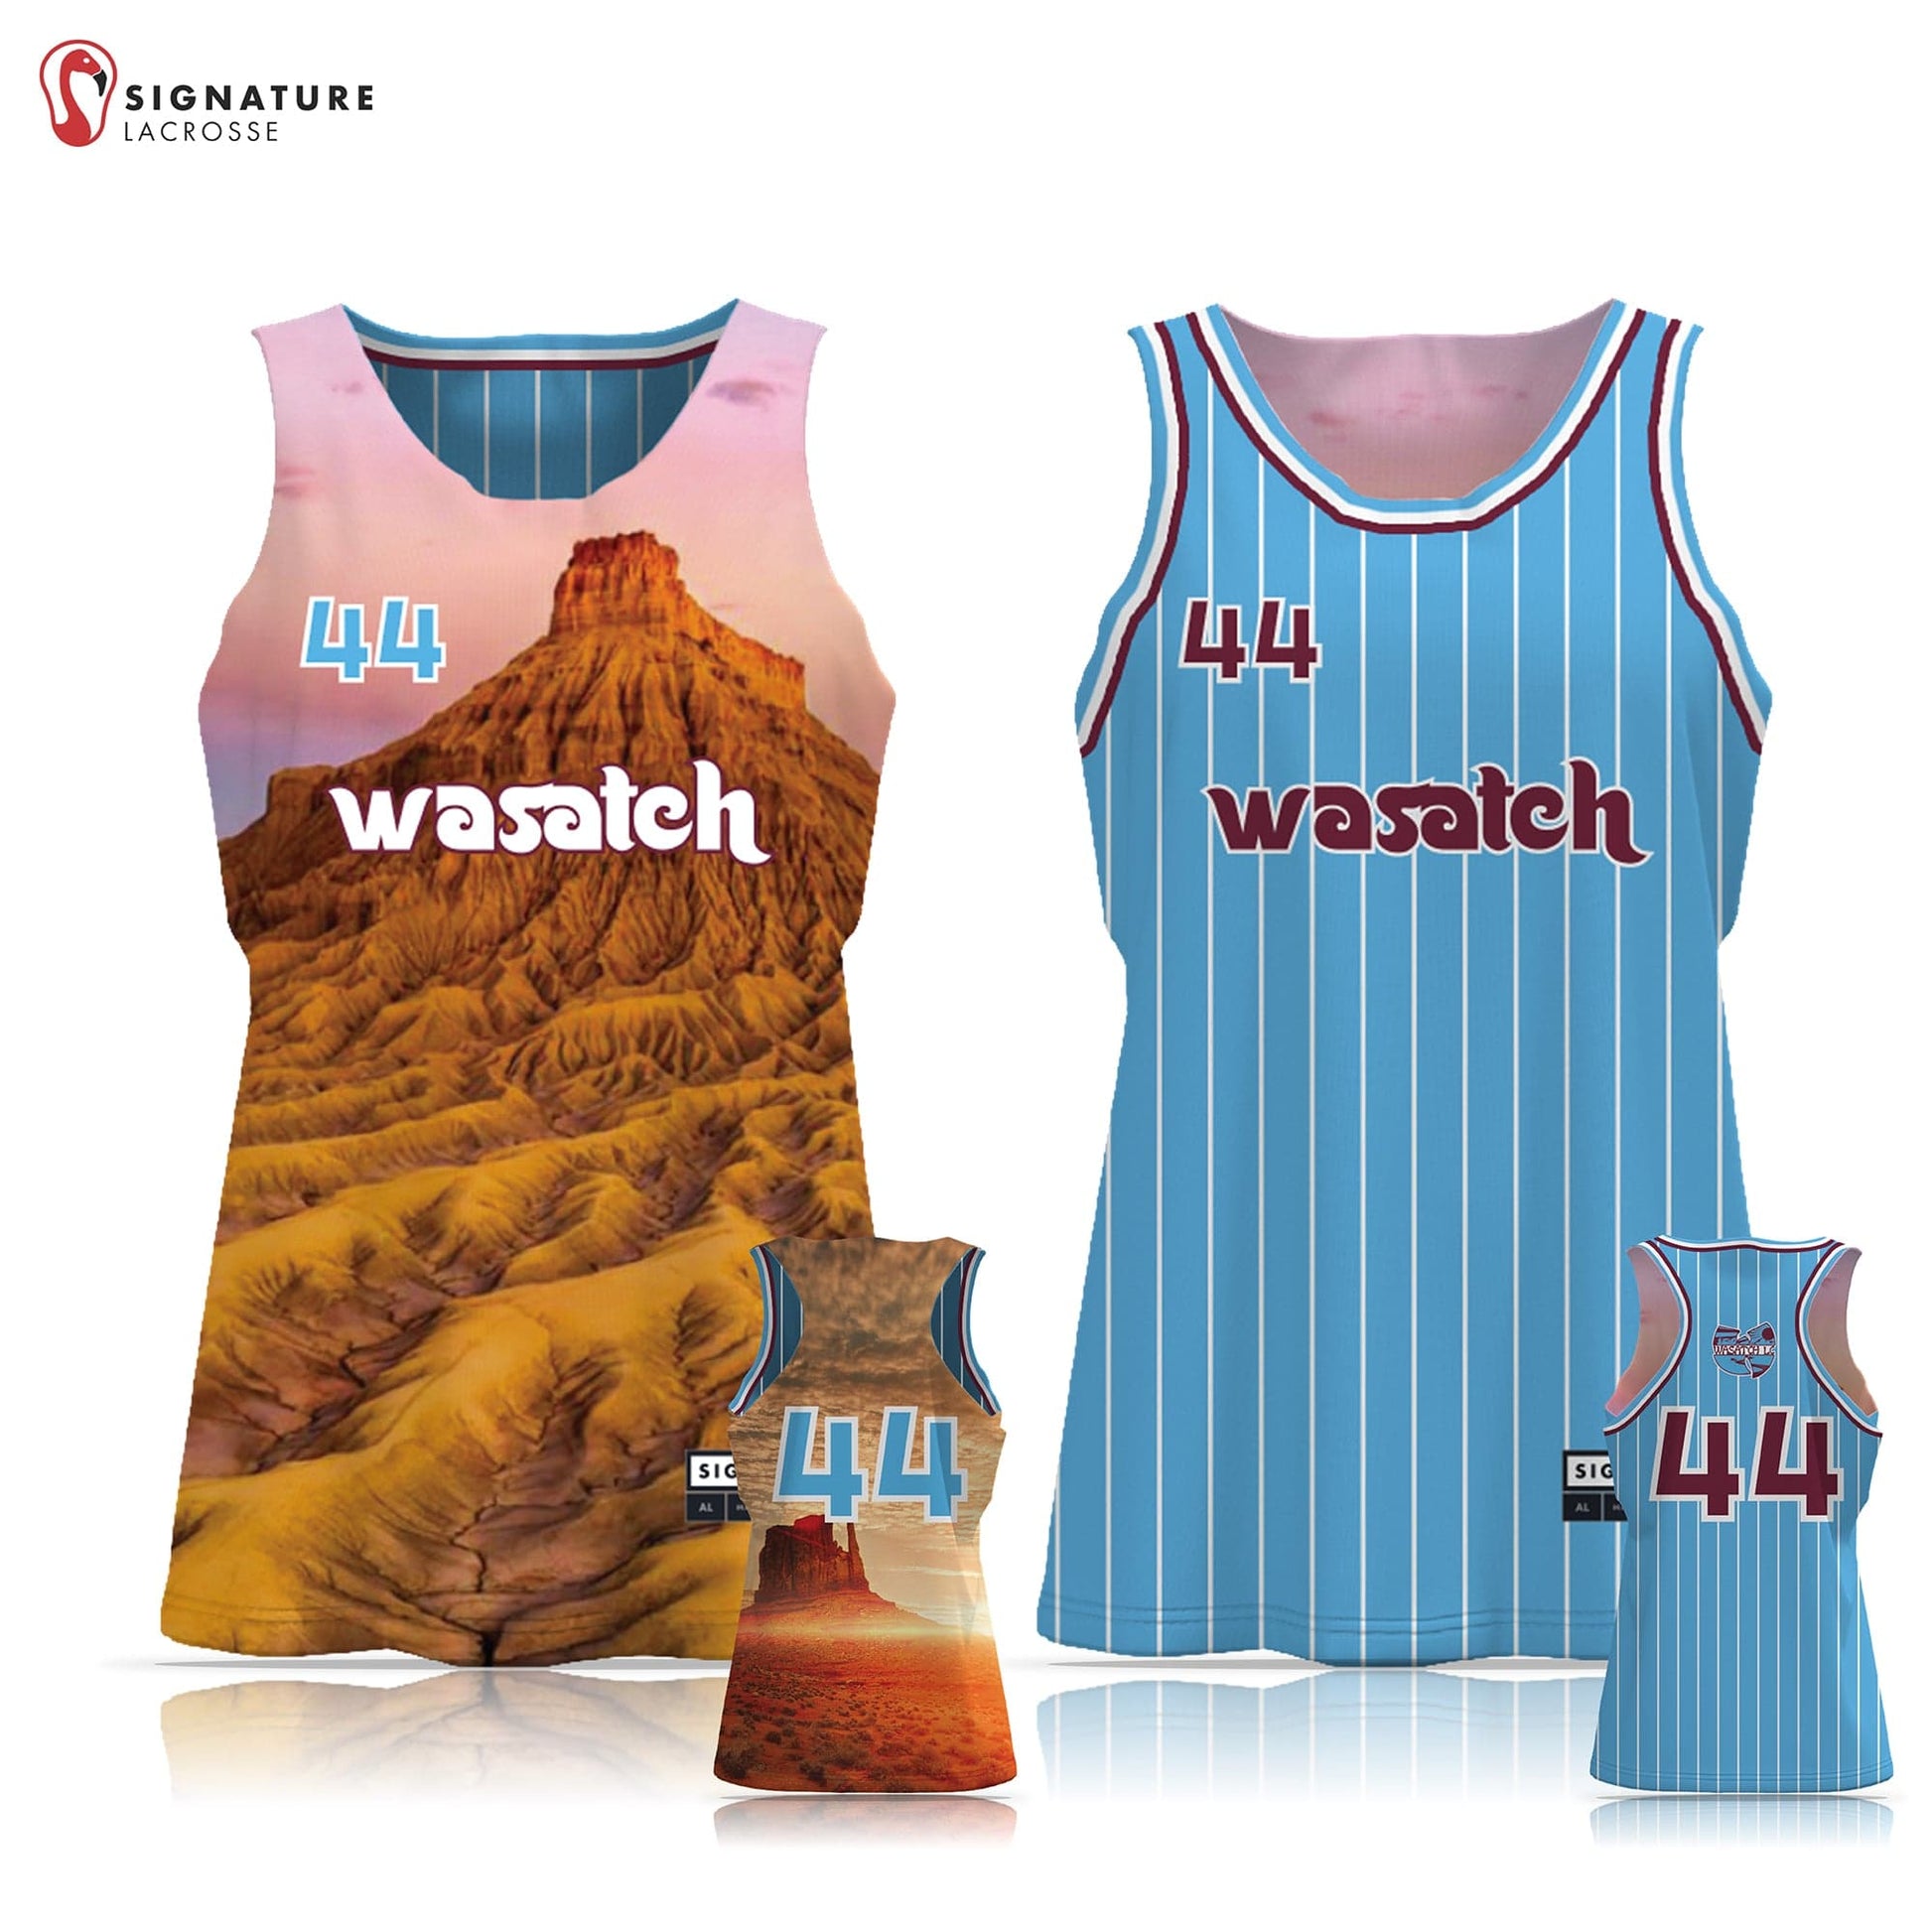 Wasatch Lacrosse  Women's Performance 3 Piece Game Package Signature Lacrosse